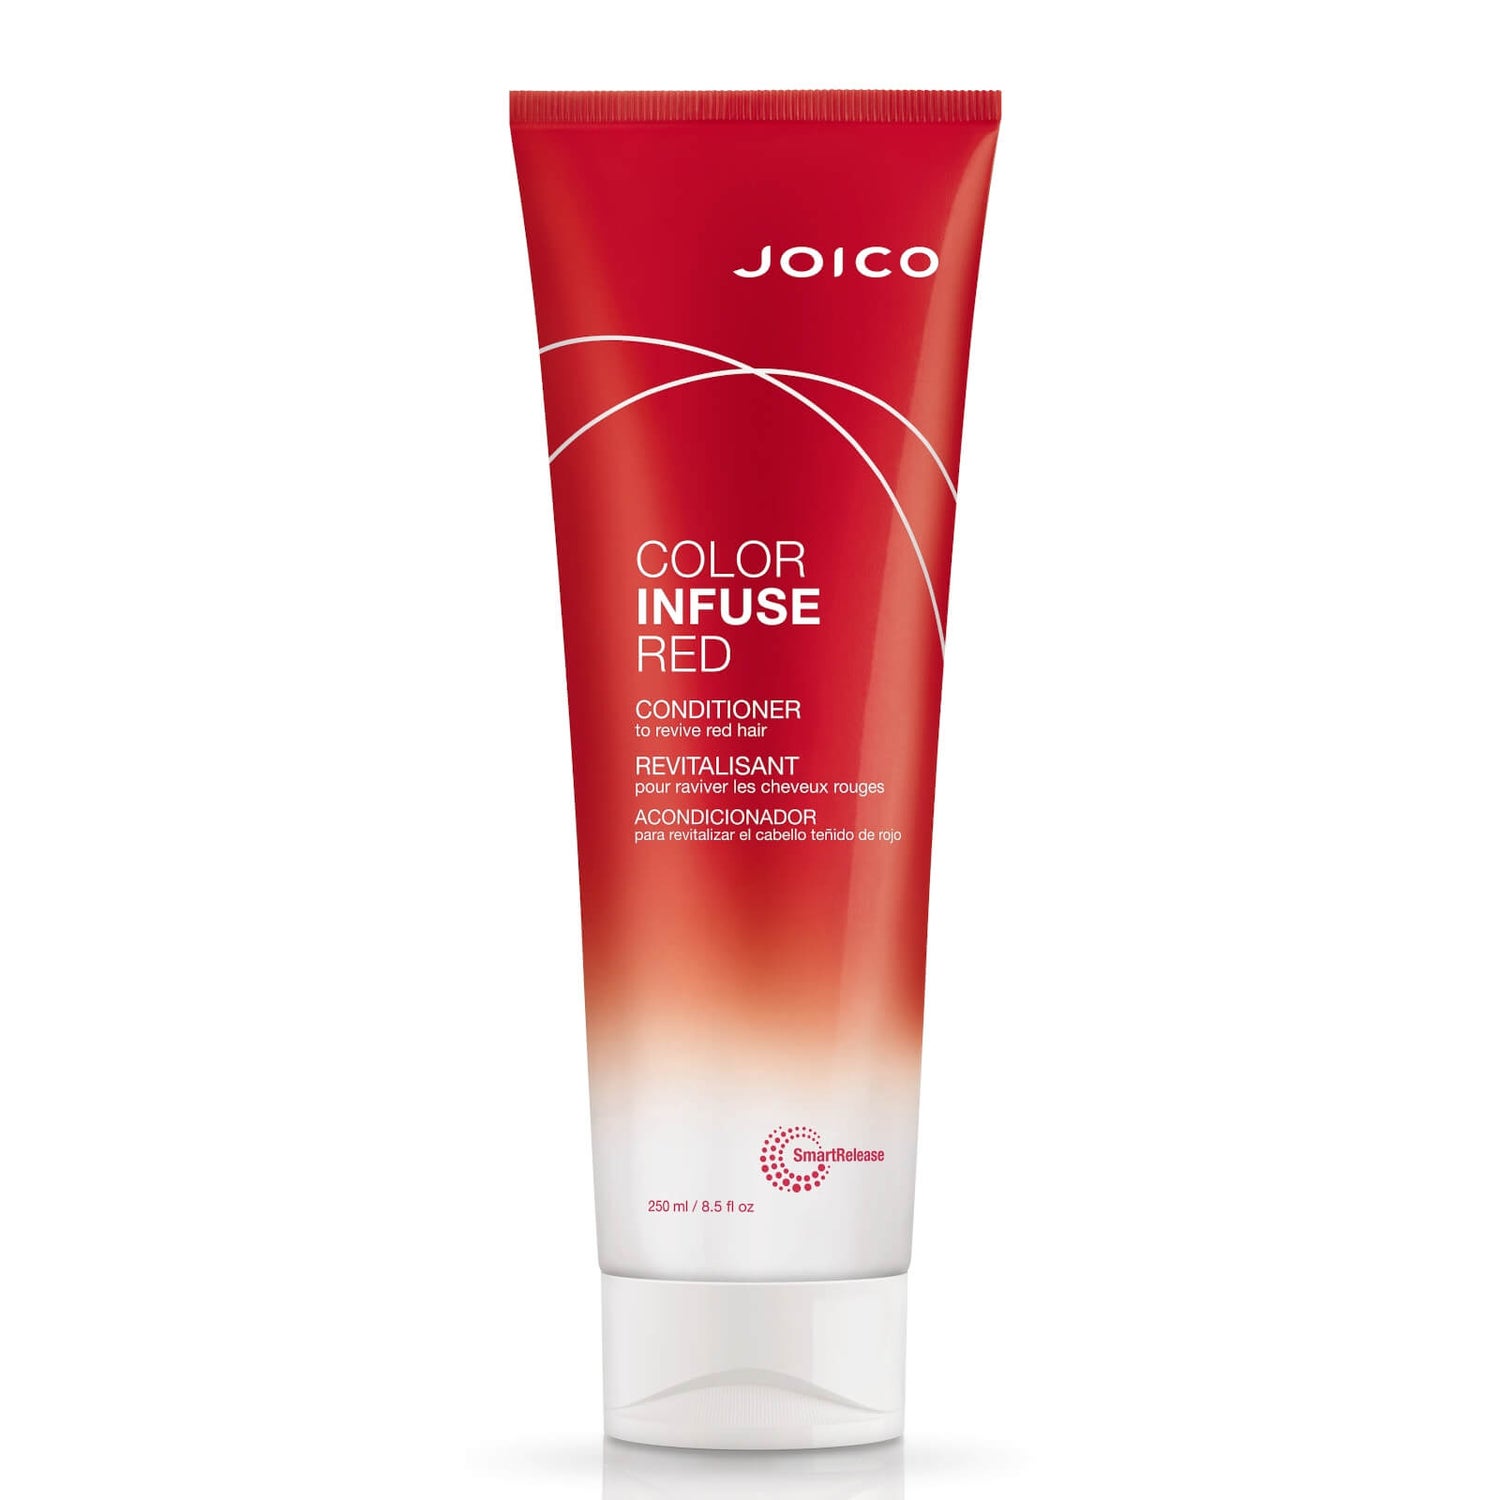 Joico Colour Infuse Red Conditioner 250ml